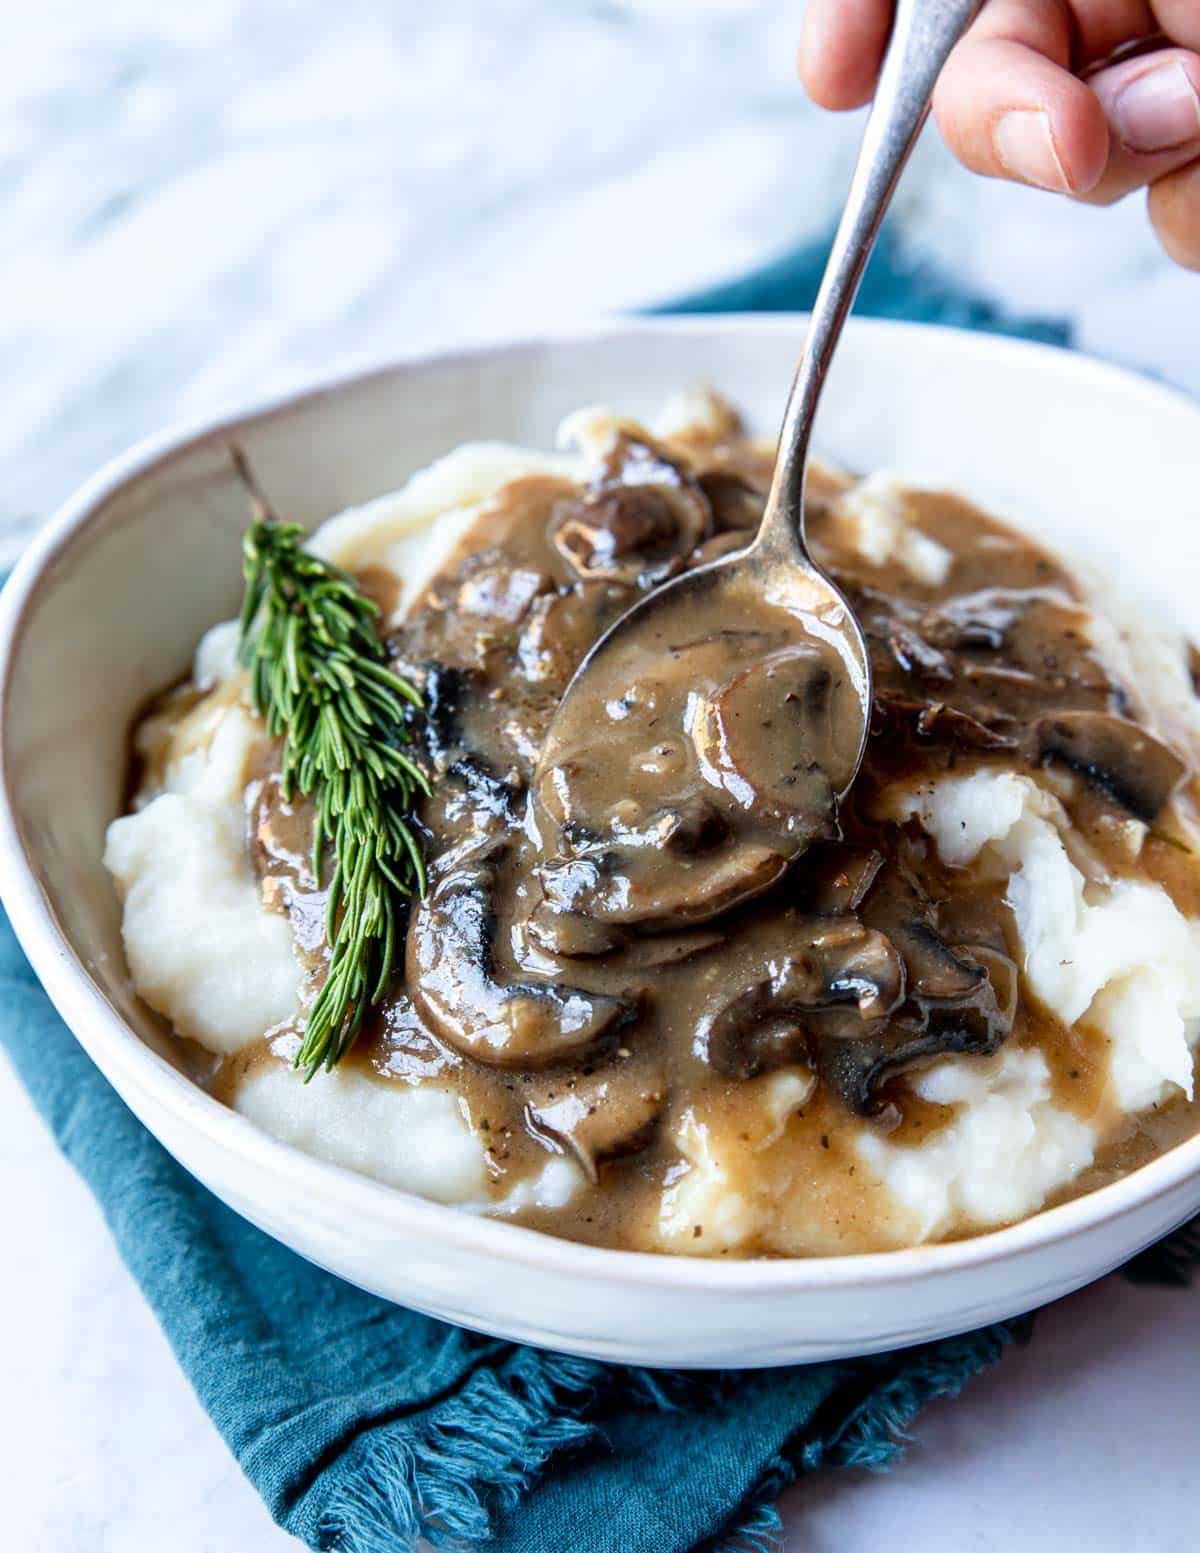 a large bowl of mashed potatoes with mushroom gravy being drizzled over top